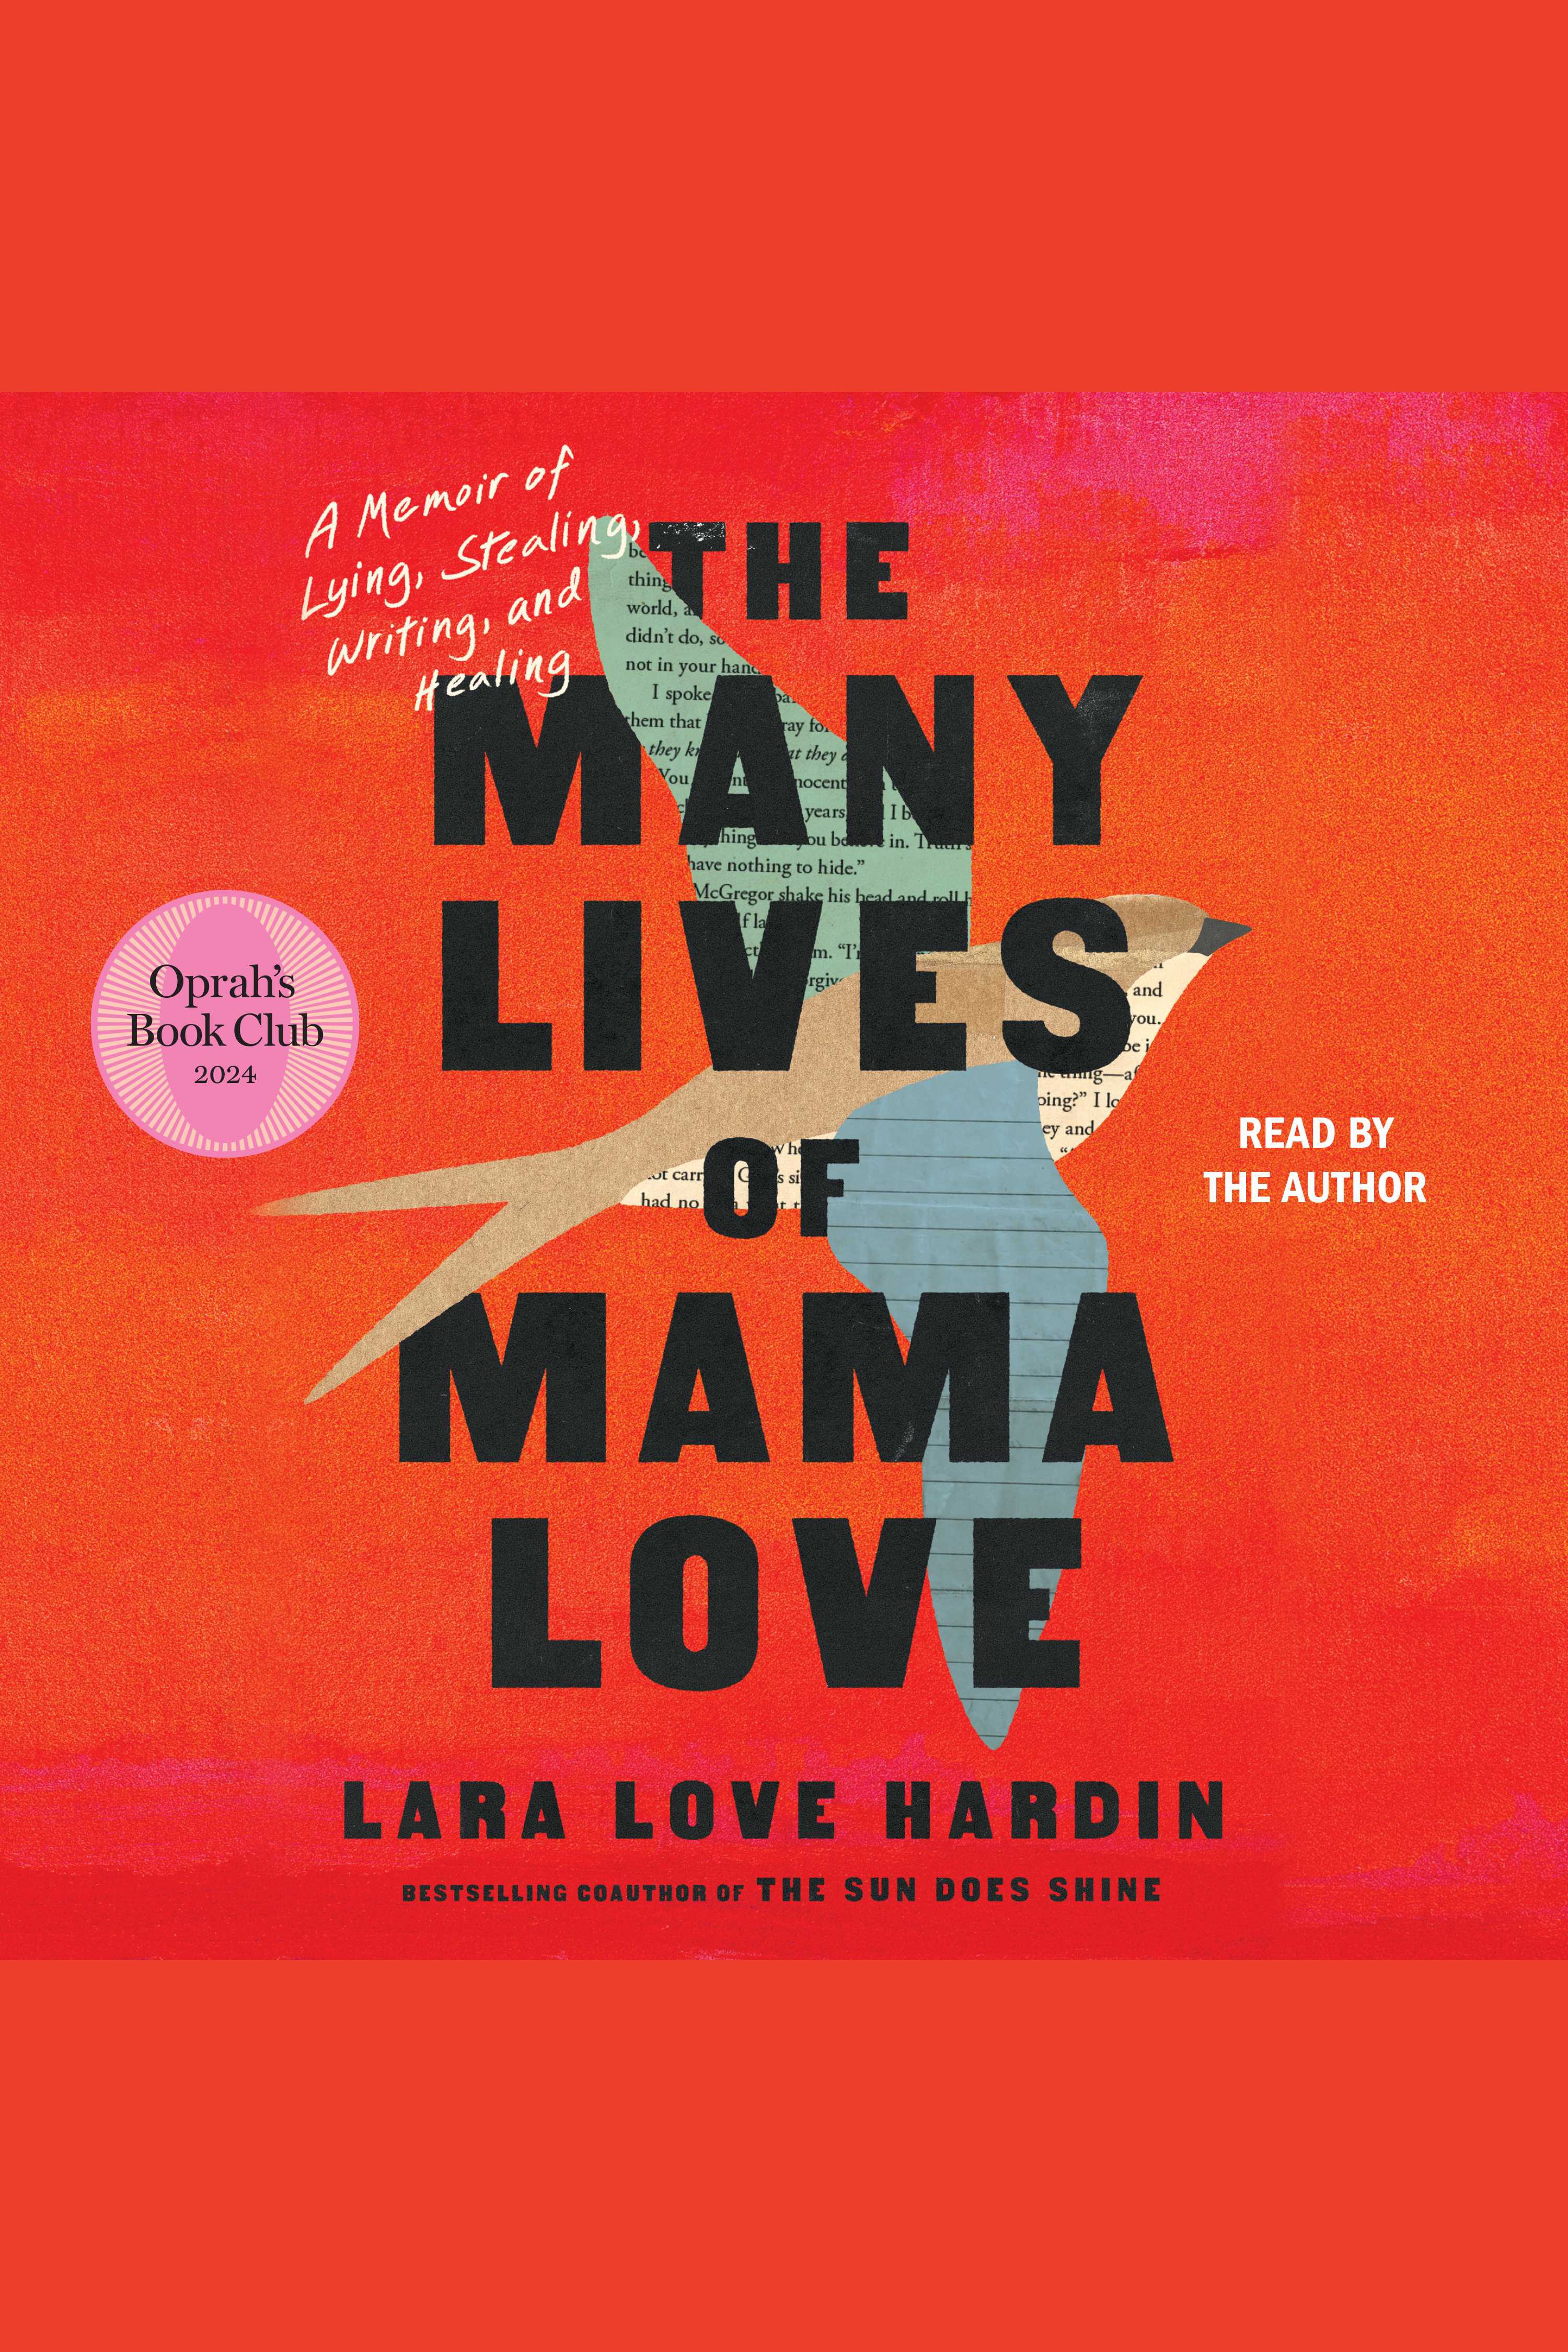 Cover image for The Many Lives of Mama Love [electronic resource] : A Memoir of Lying, Stealing, Writing, and Healing